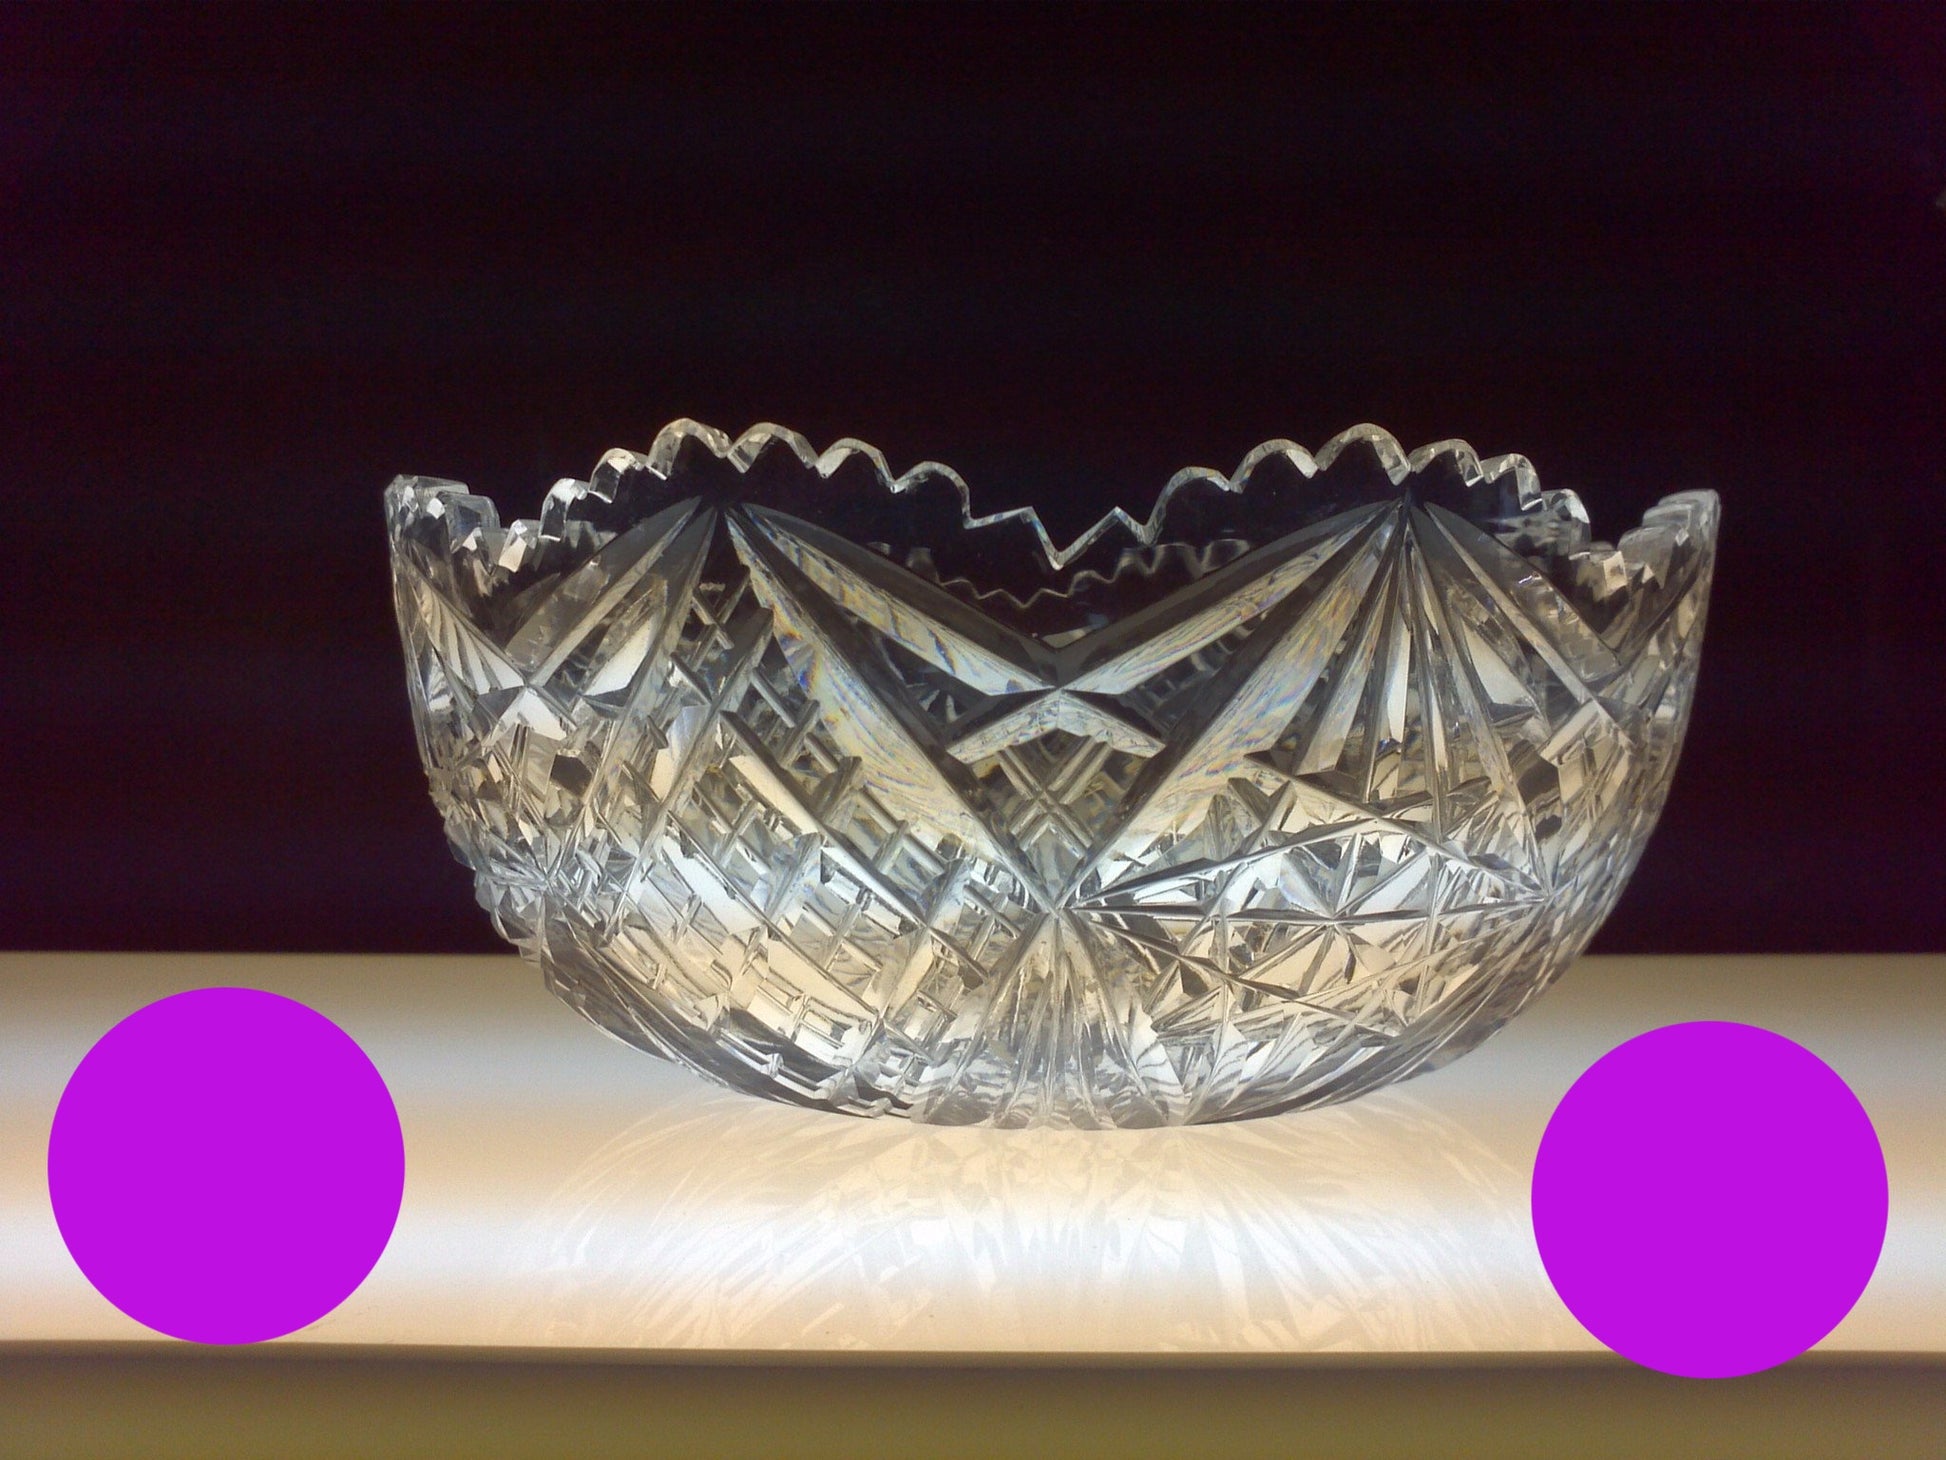 8" Antique Hand Cut Bowl Brilliant Period 1886 - 1915 - O'Rourke crystal awards & gifts abp cut glass